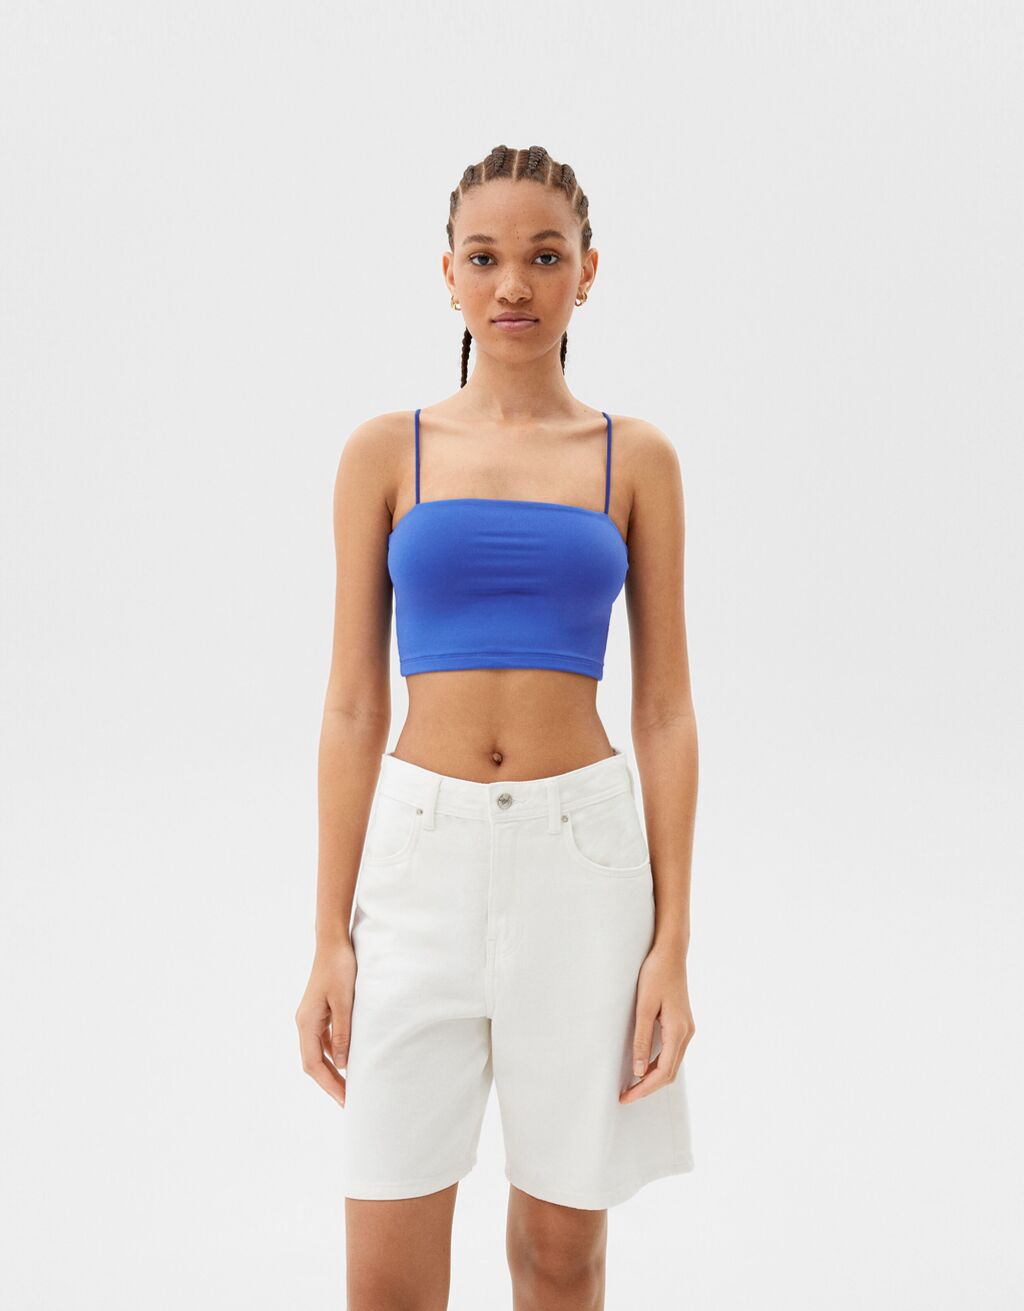 Cropped tank top